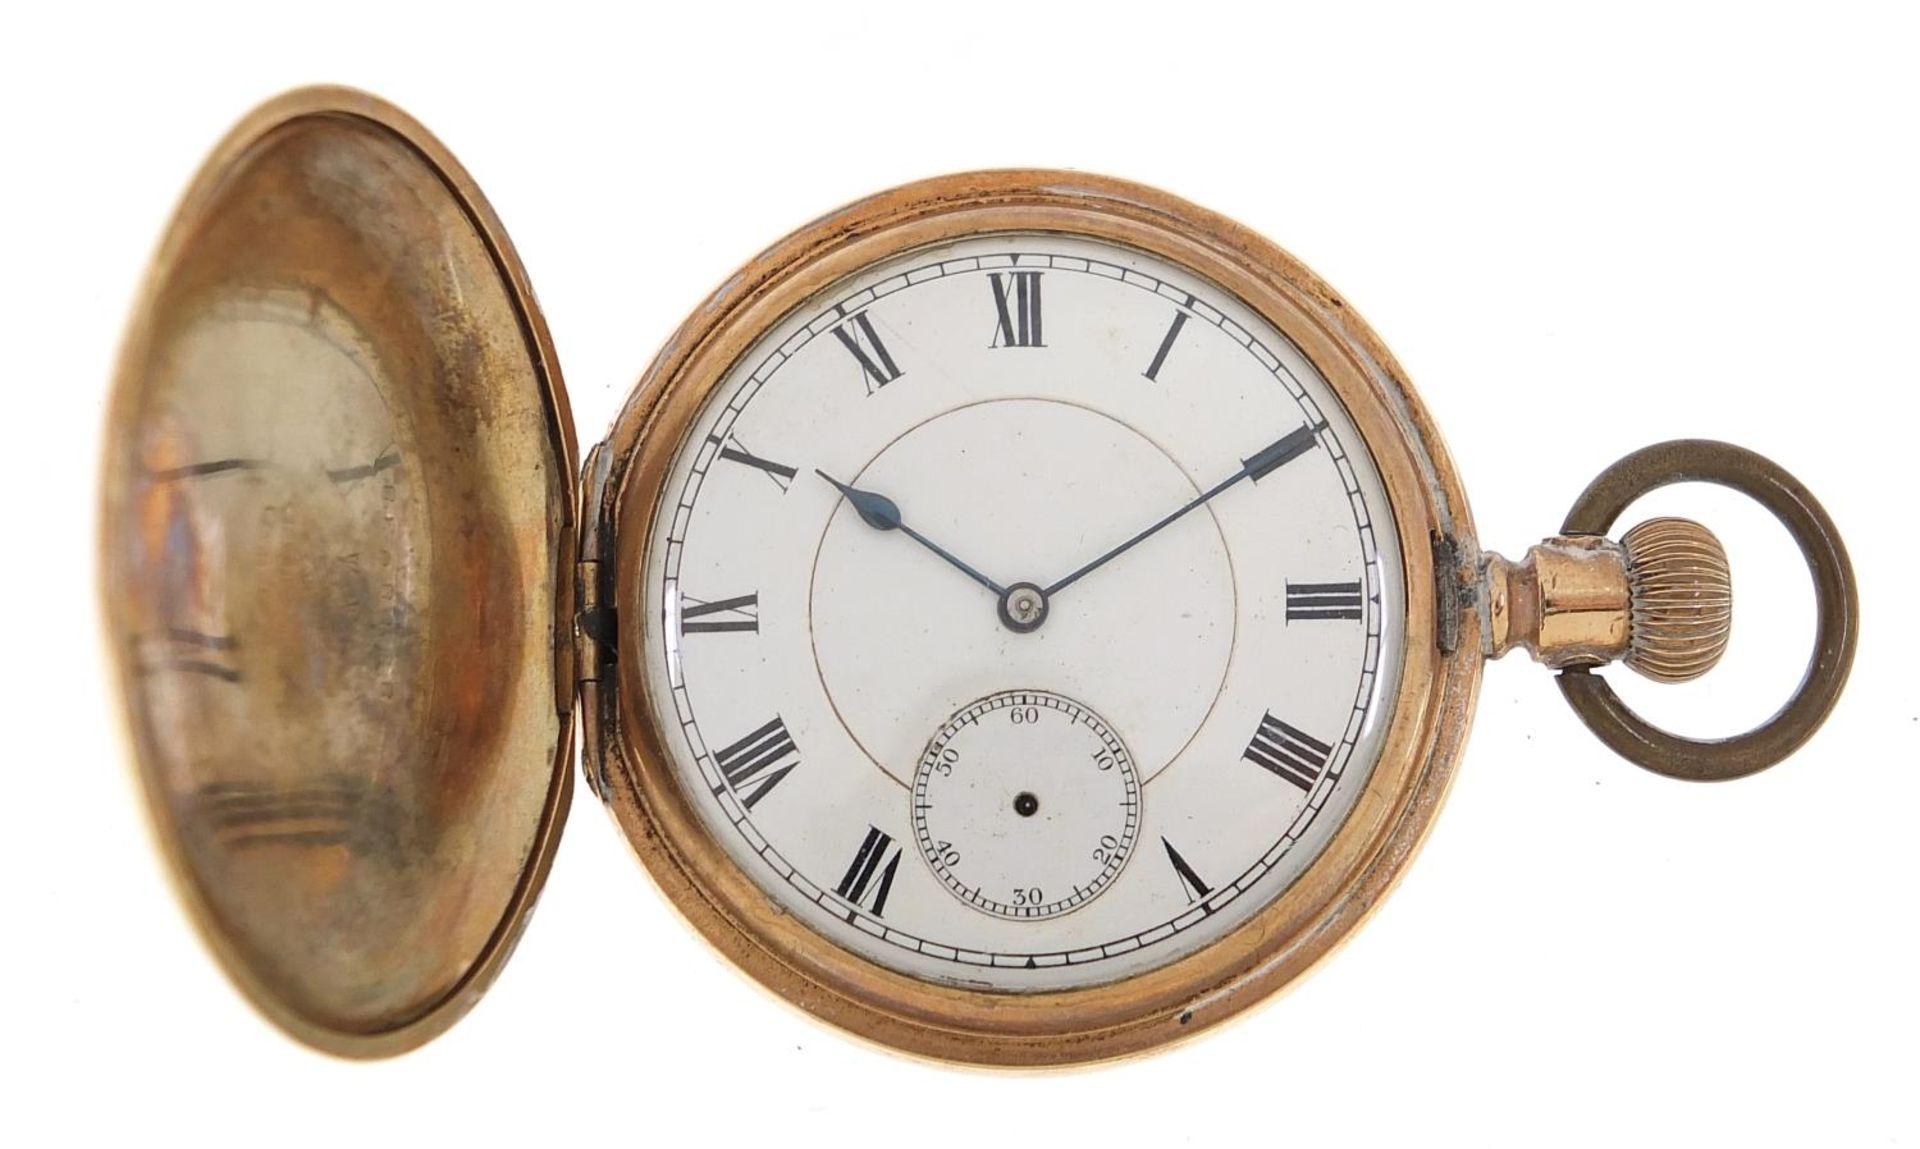 Elgin gold plated full hunter pocket watch, the movement numbered 15028339, 50mm in diameter